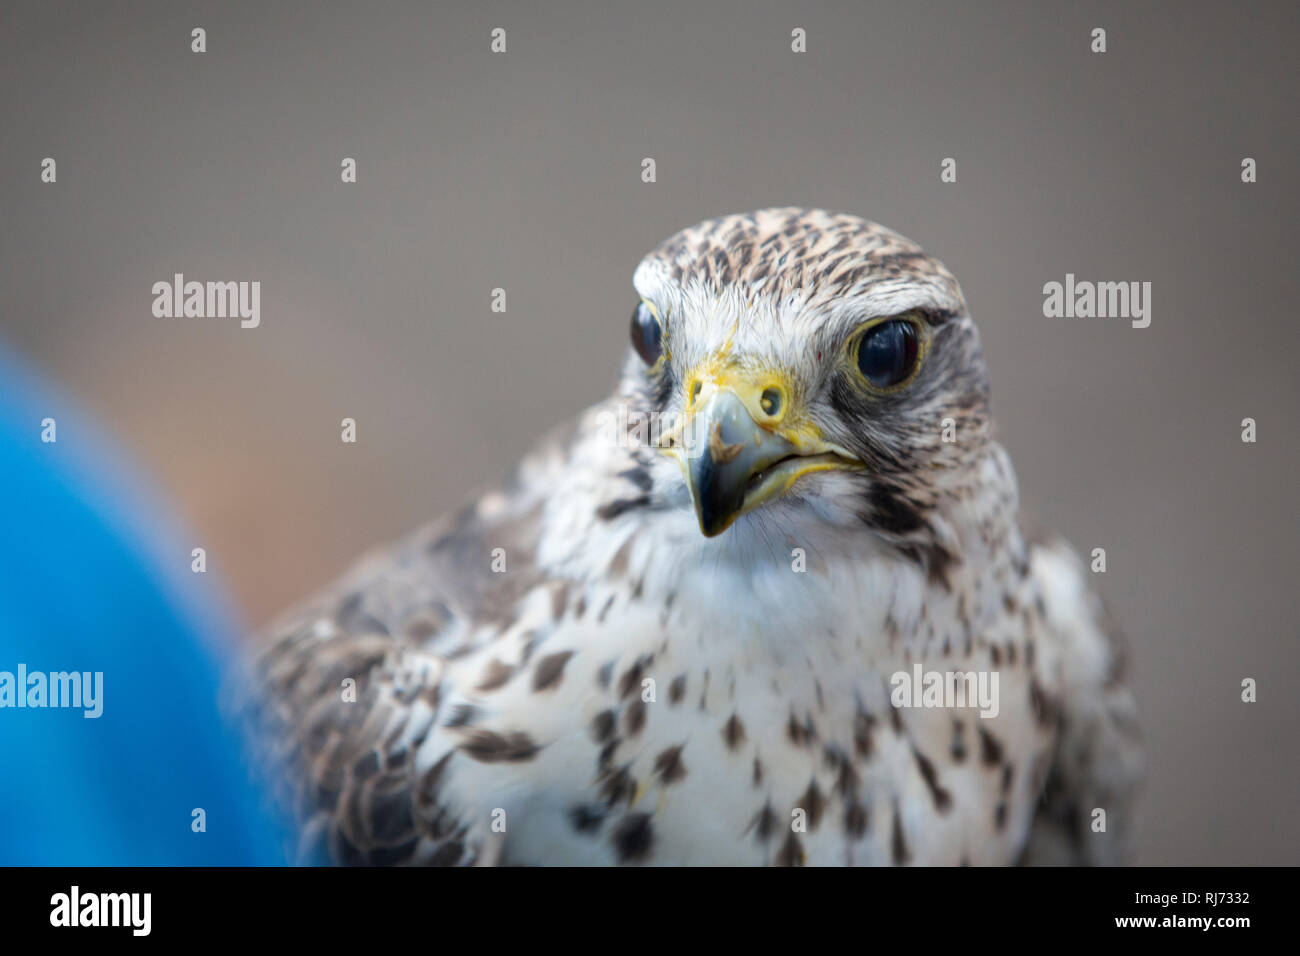 Bussard High Resolution Stock Photography and Images - Alamy